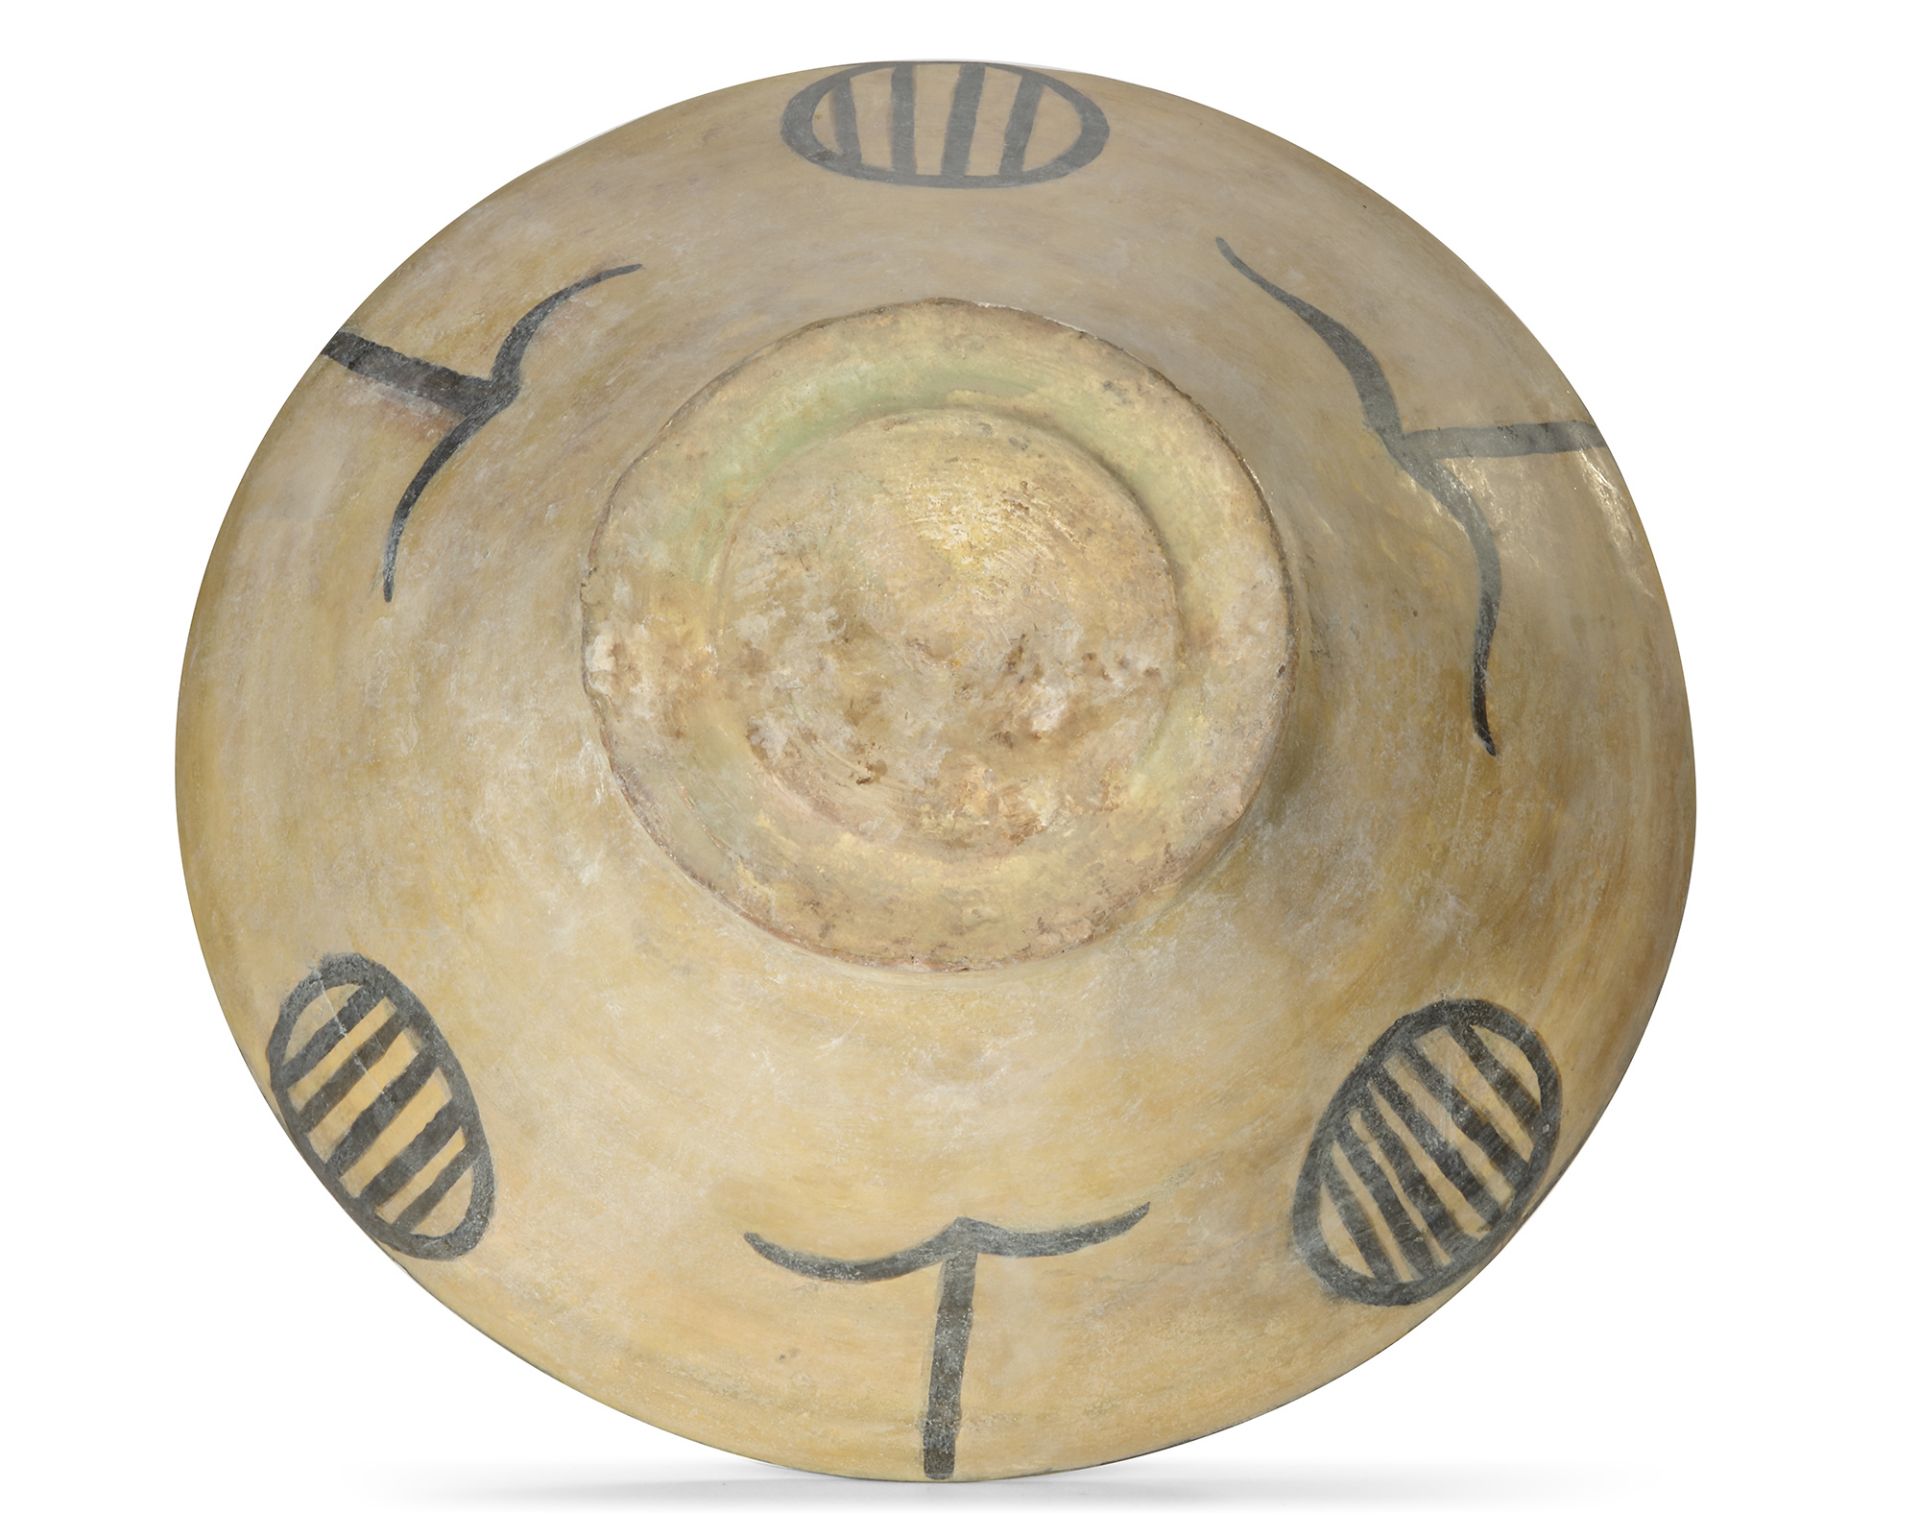 A NISHAPUR POTTERY BOWL, EASTERN PERSIA, 10TH CENTURY - Image 10 of 10